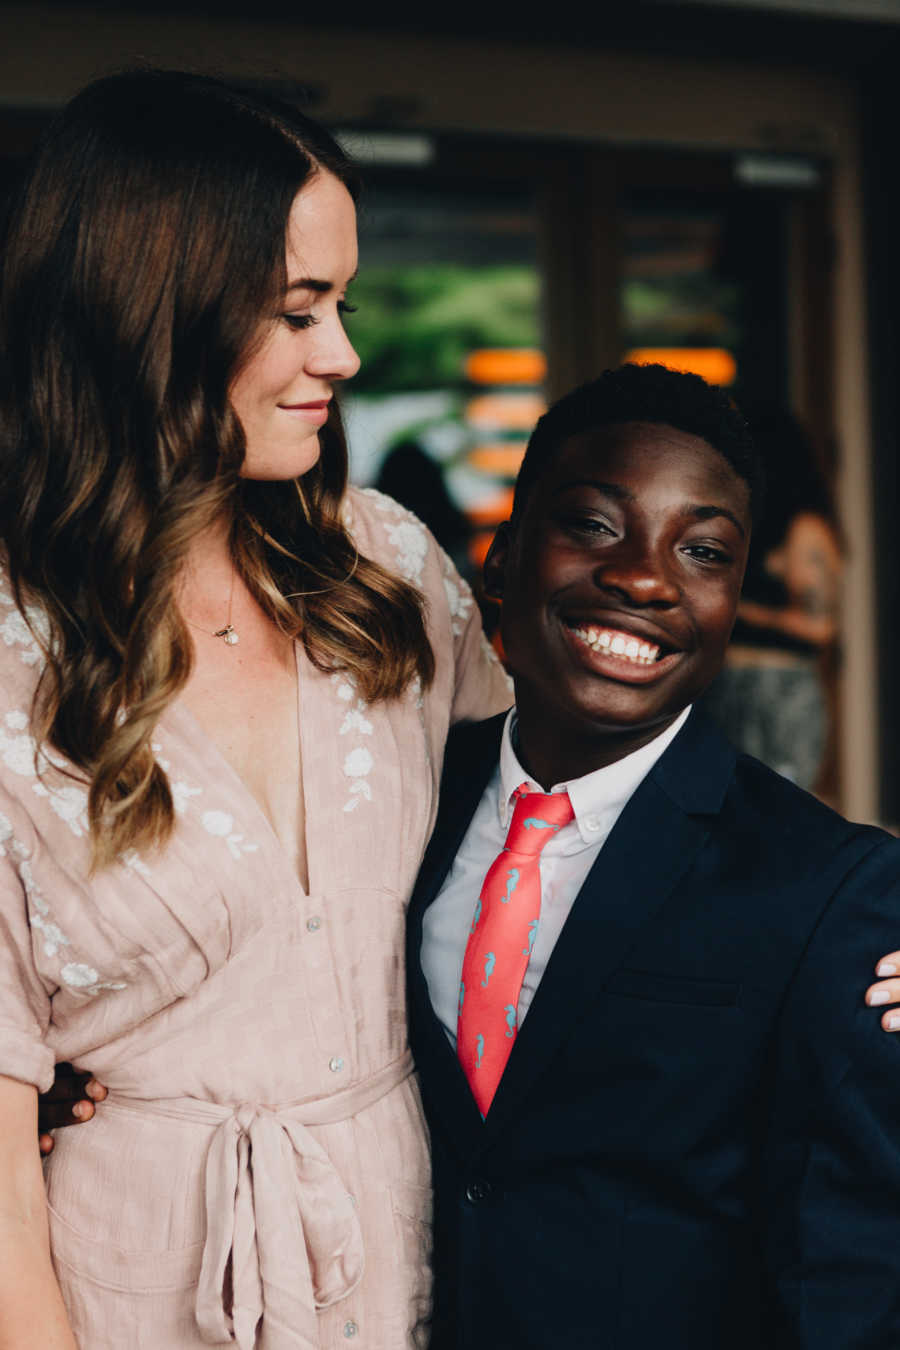 Woman smiles with arm around adopted son's biological brother